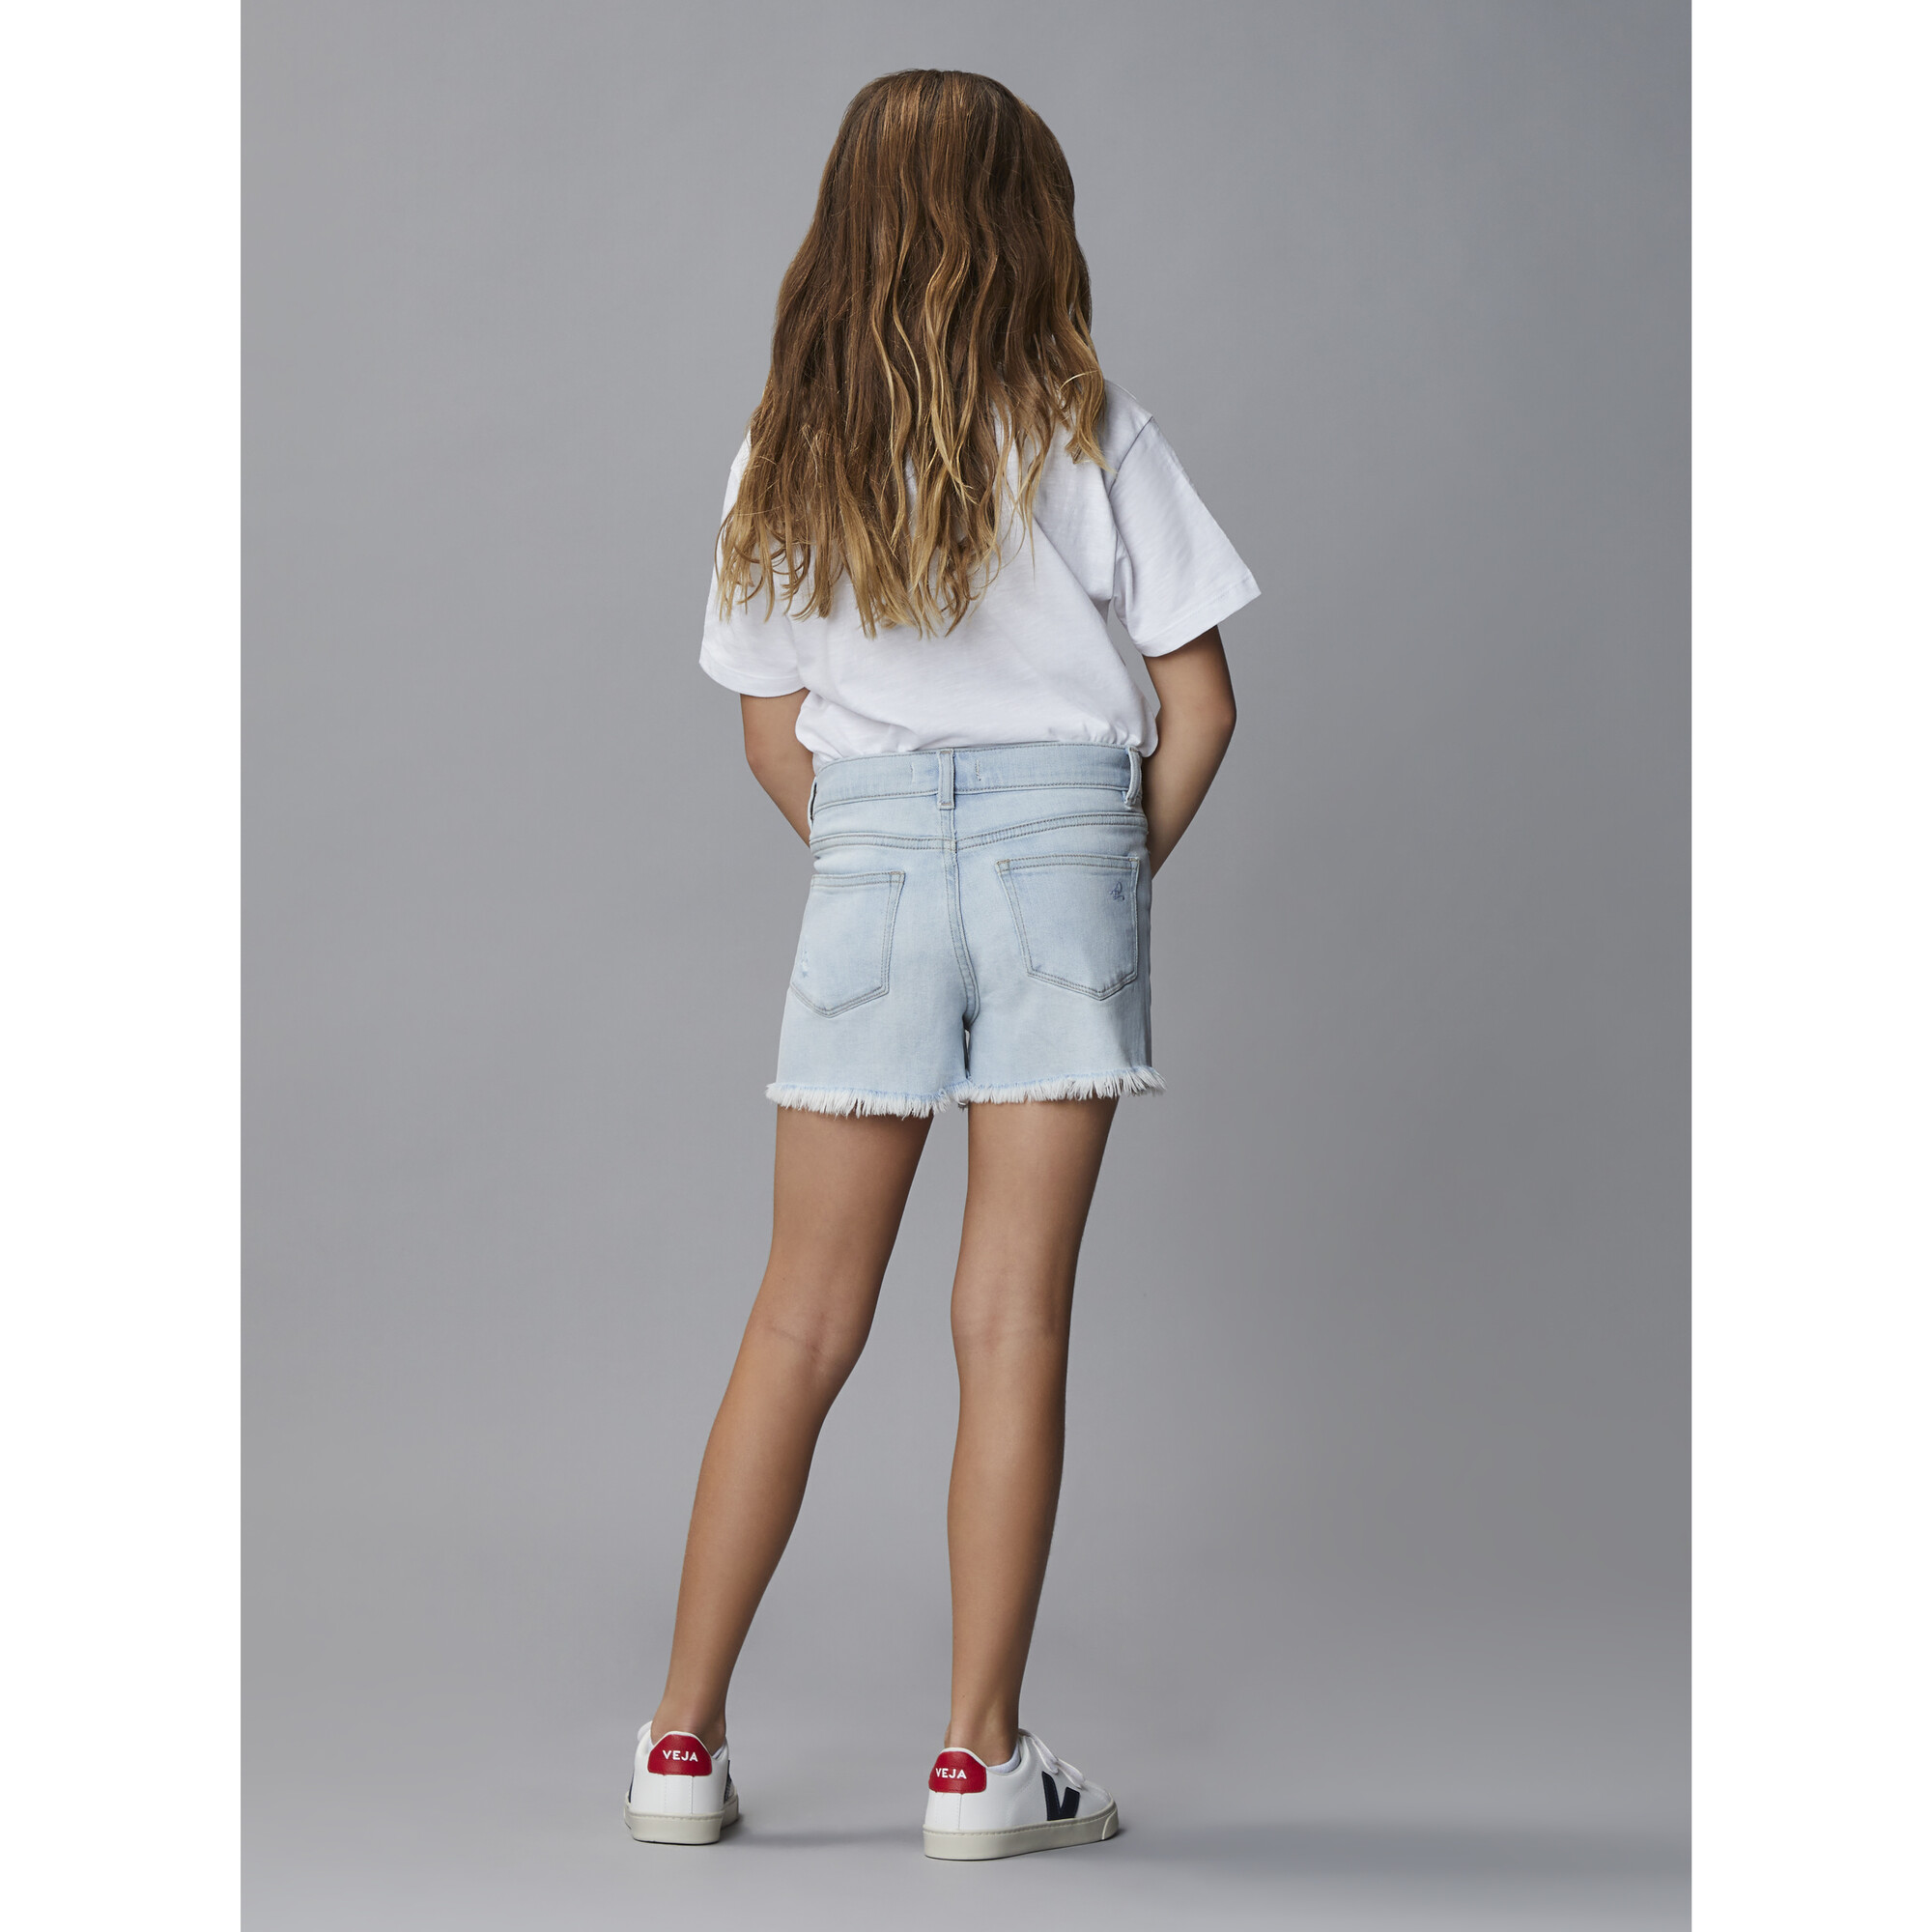 DL1961 Ross Distressed Lucy High Rise Shorts – a Spirit Animal